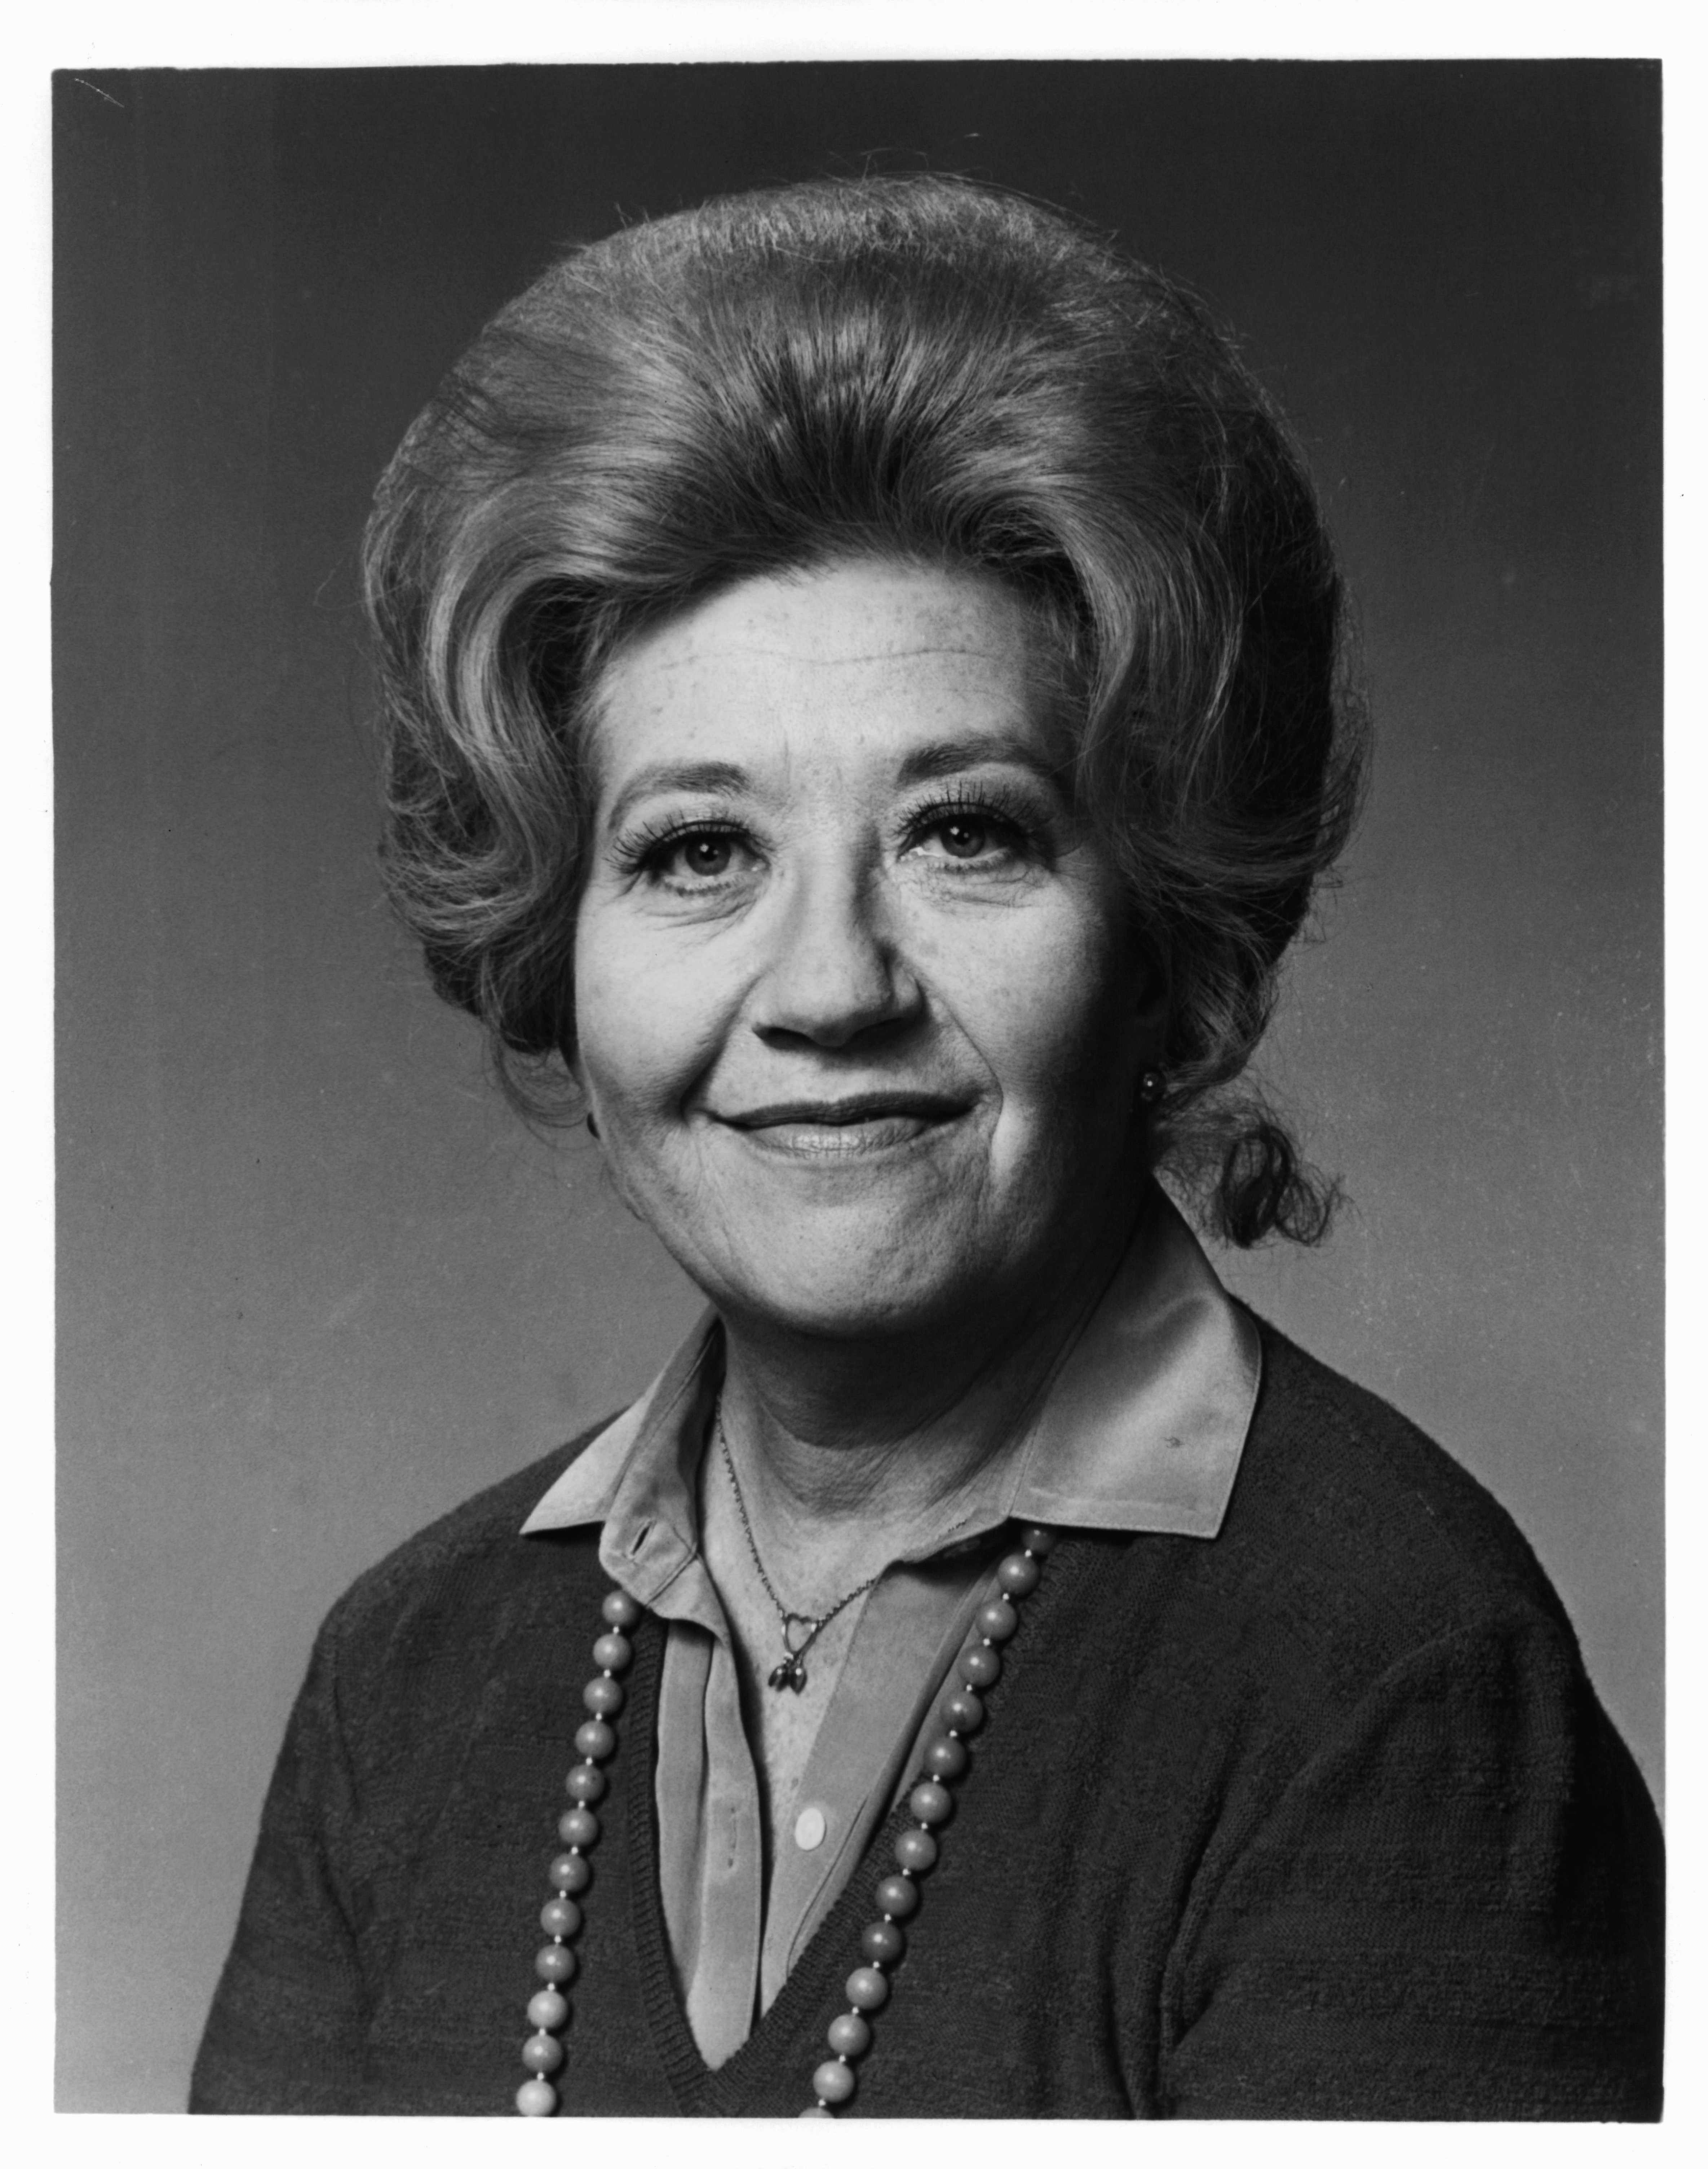 Charlotte Rae in a publicity portrait from the television series "The Facts Of Life" circa 1980. | Source: Getty Images